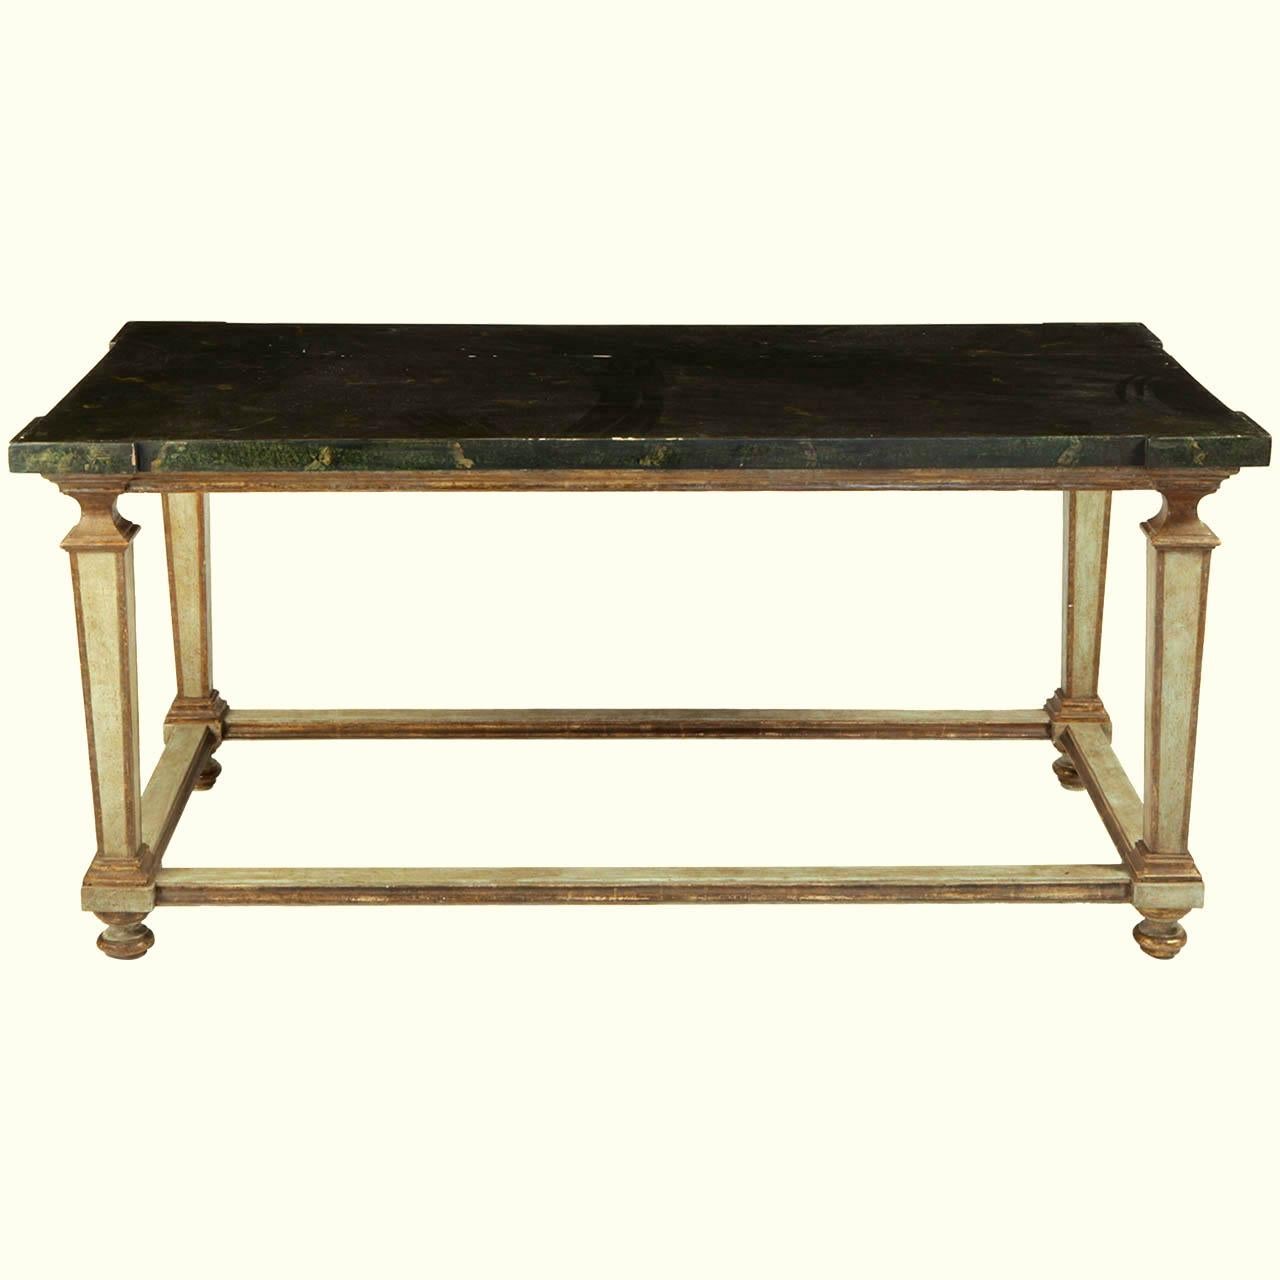 Fine Italian 17th Century Painted Center Table or Dining Table In Good Condition For Sale In Rome, IT